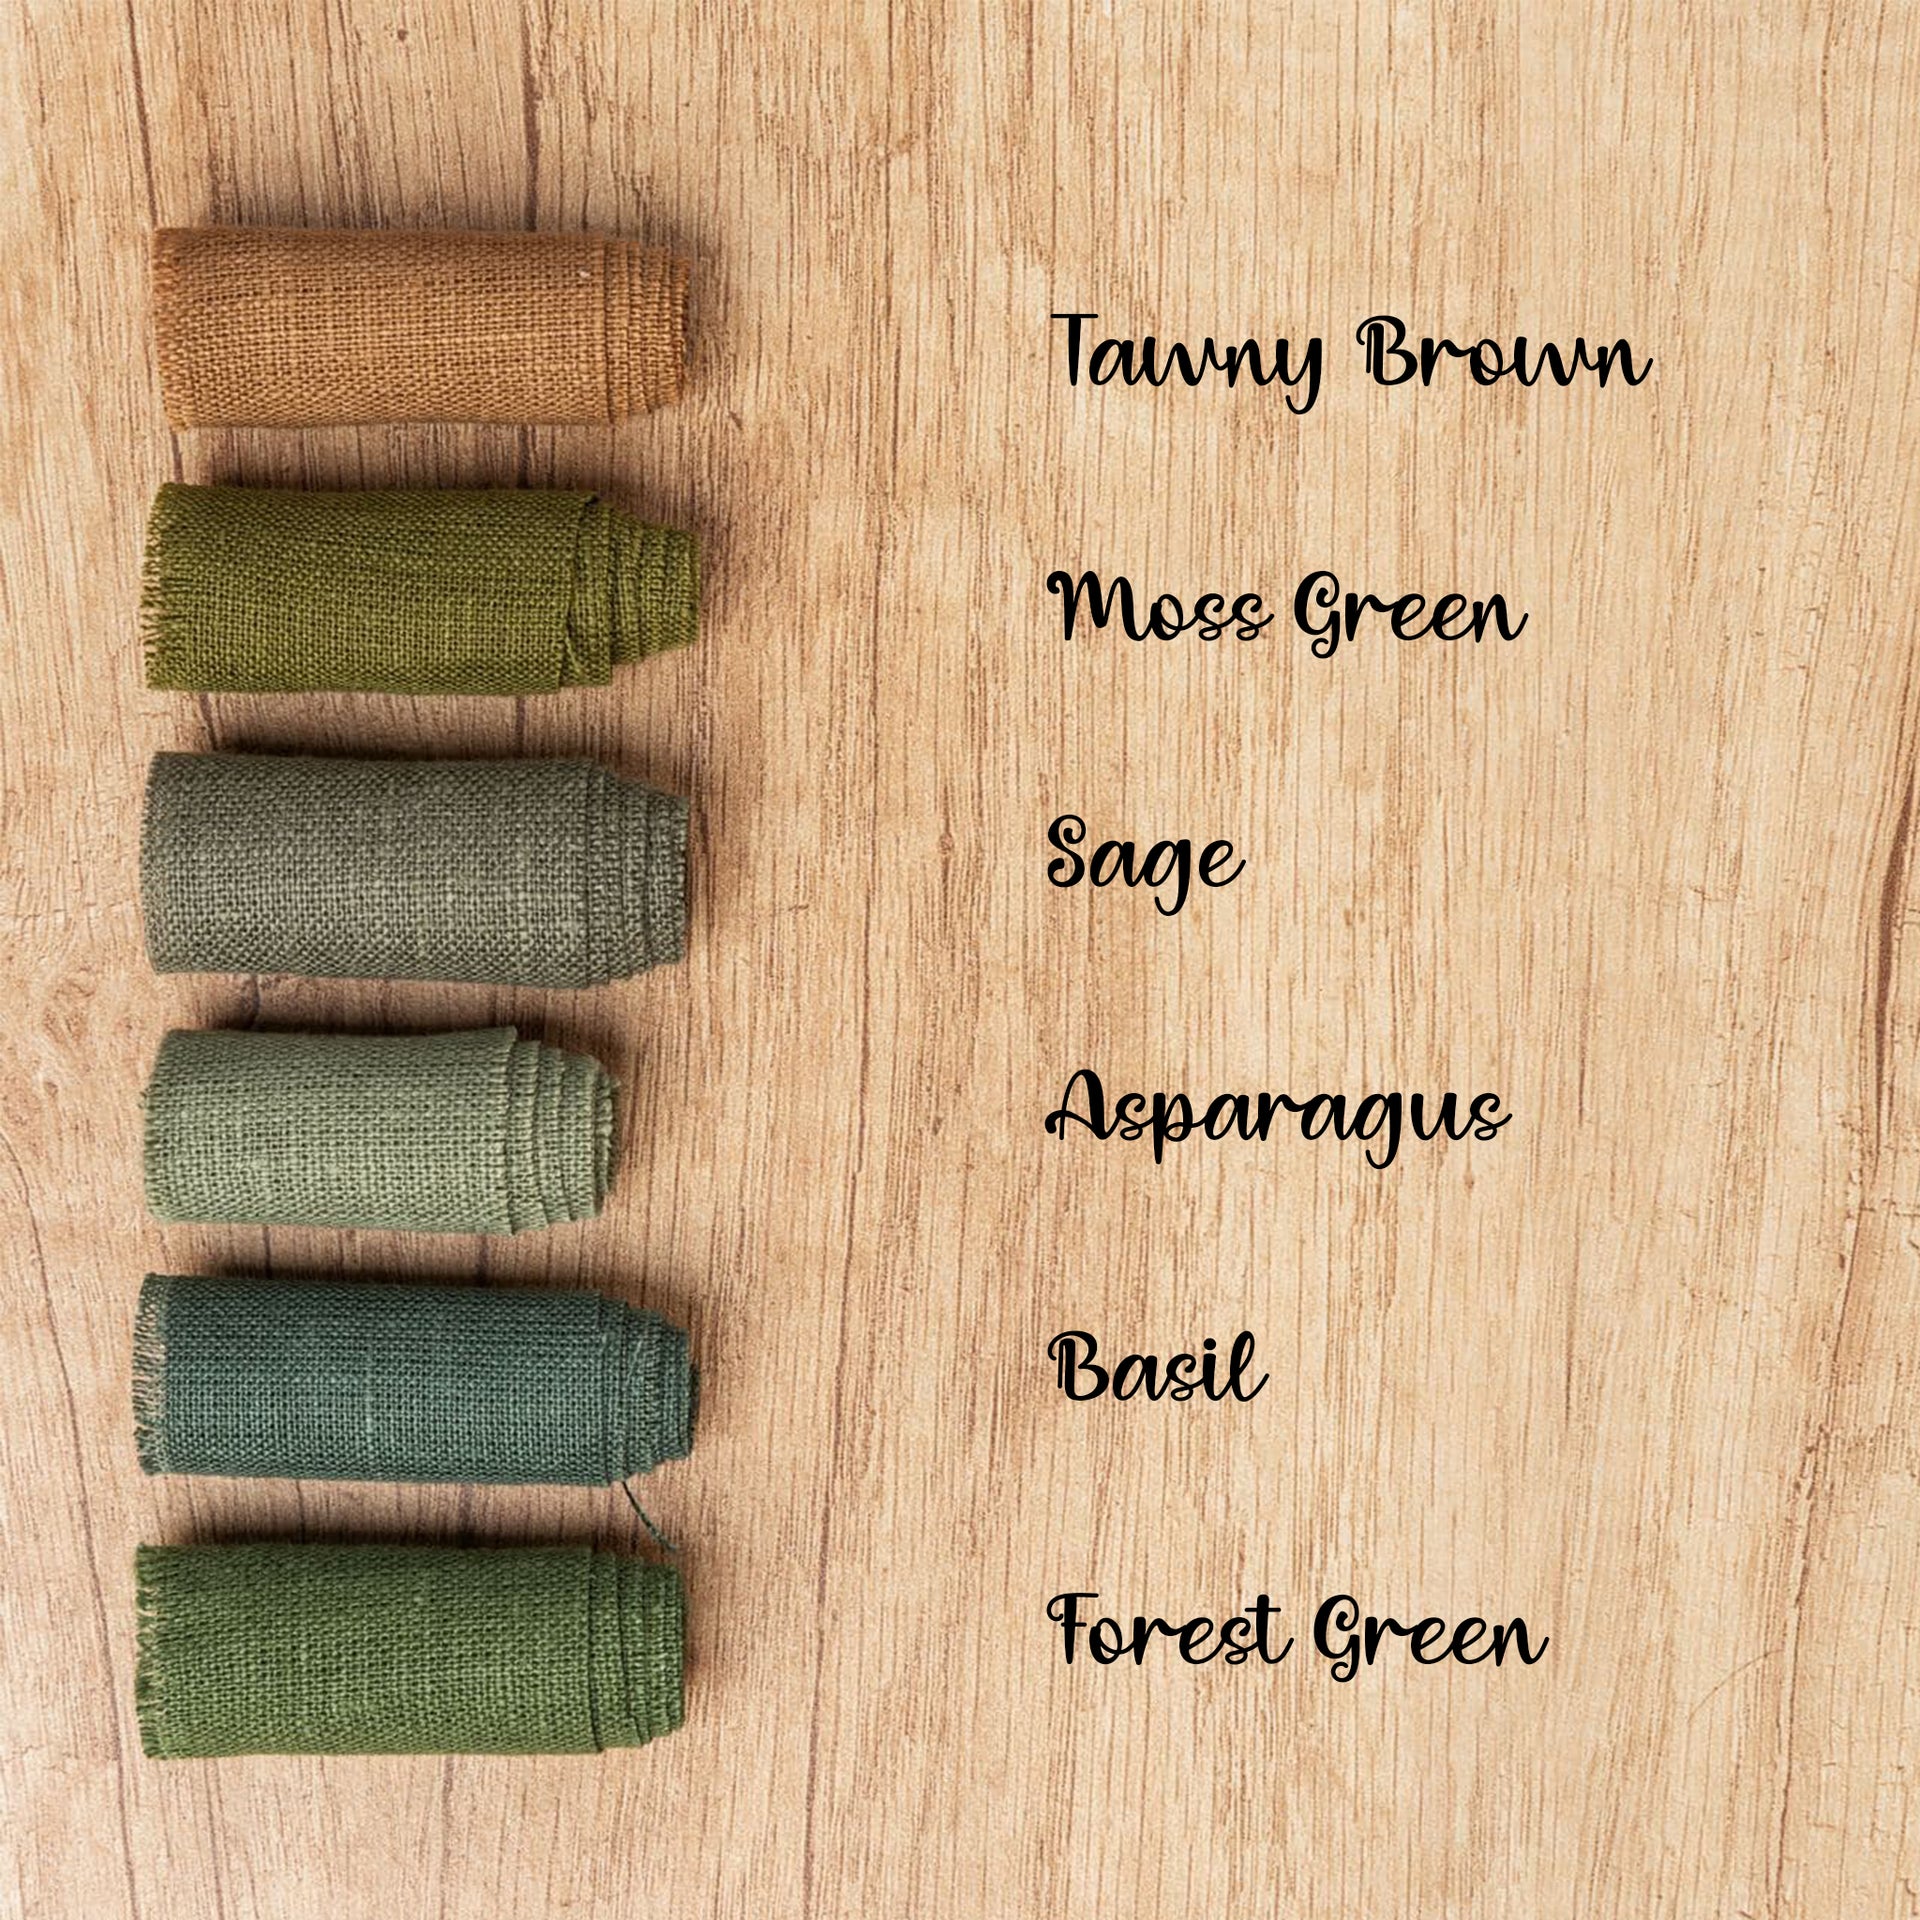 @ color:Tawny Brown,color:Asparagus,color:Forest Greencolor:Tawny Brown,color:Asparagus,color:Forest Green, color:Moss Green, color:Sage, color:Basil